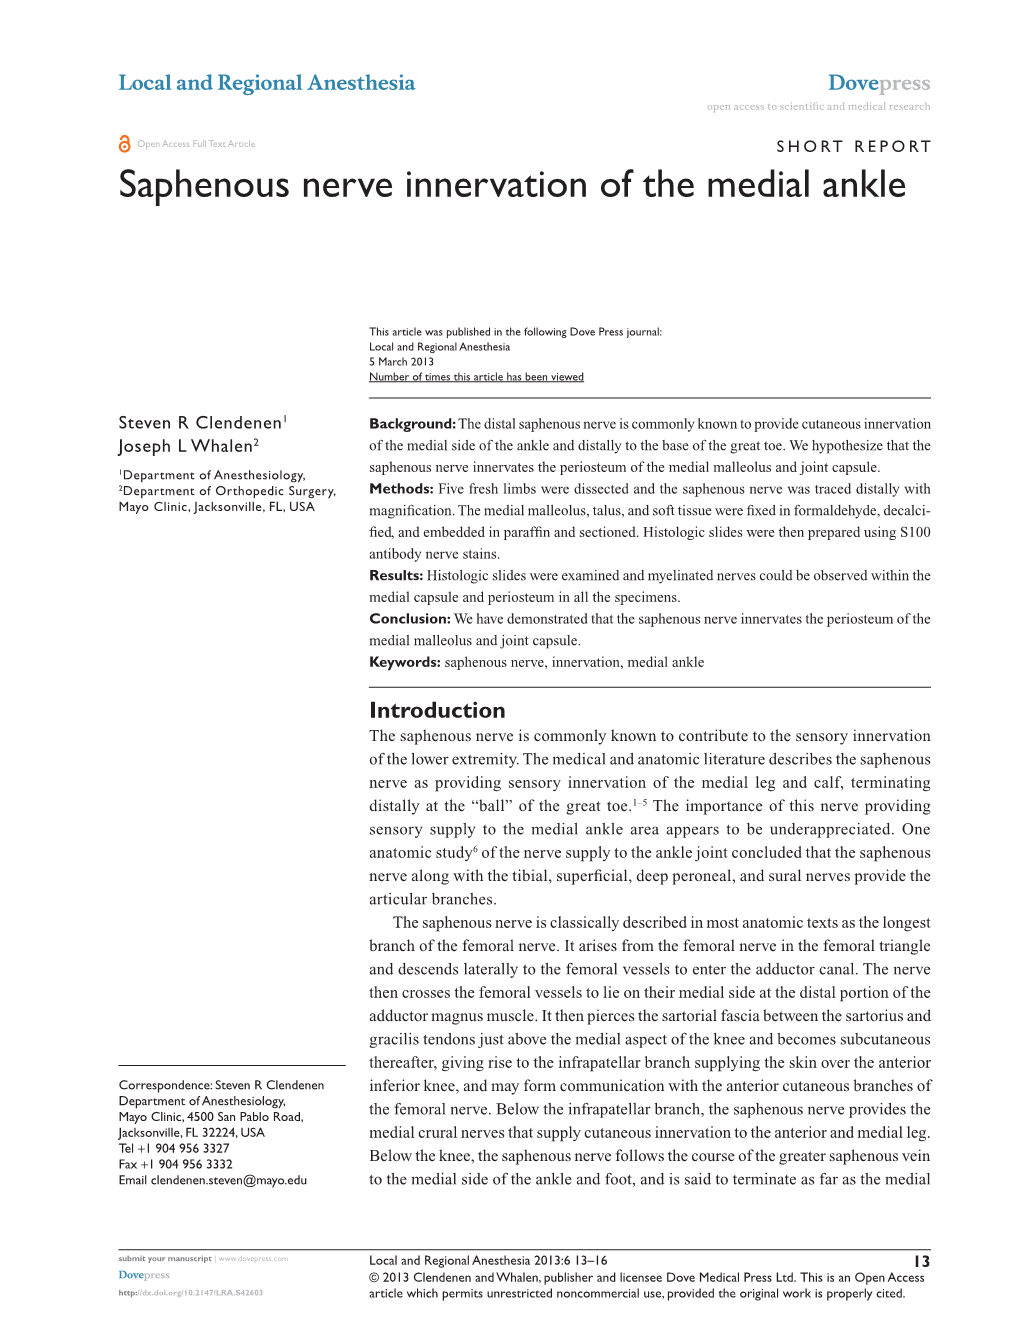 Saphenous Nerve Innervation of the Medial Ankle